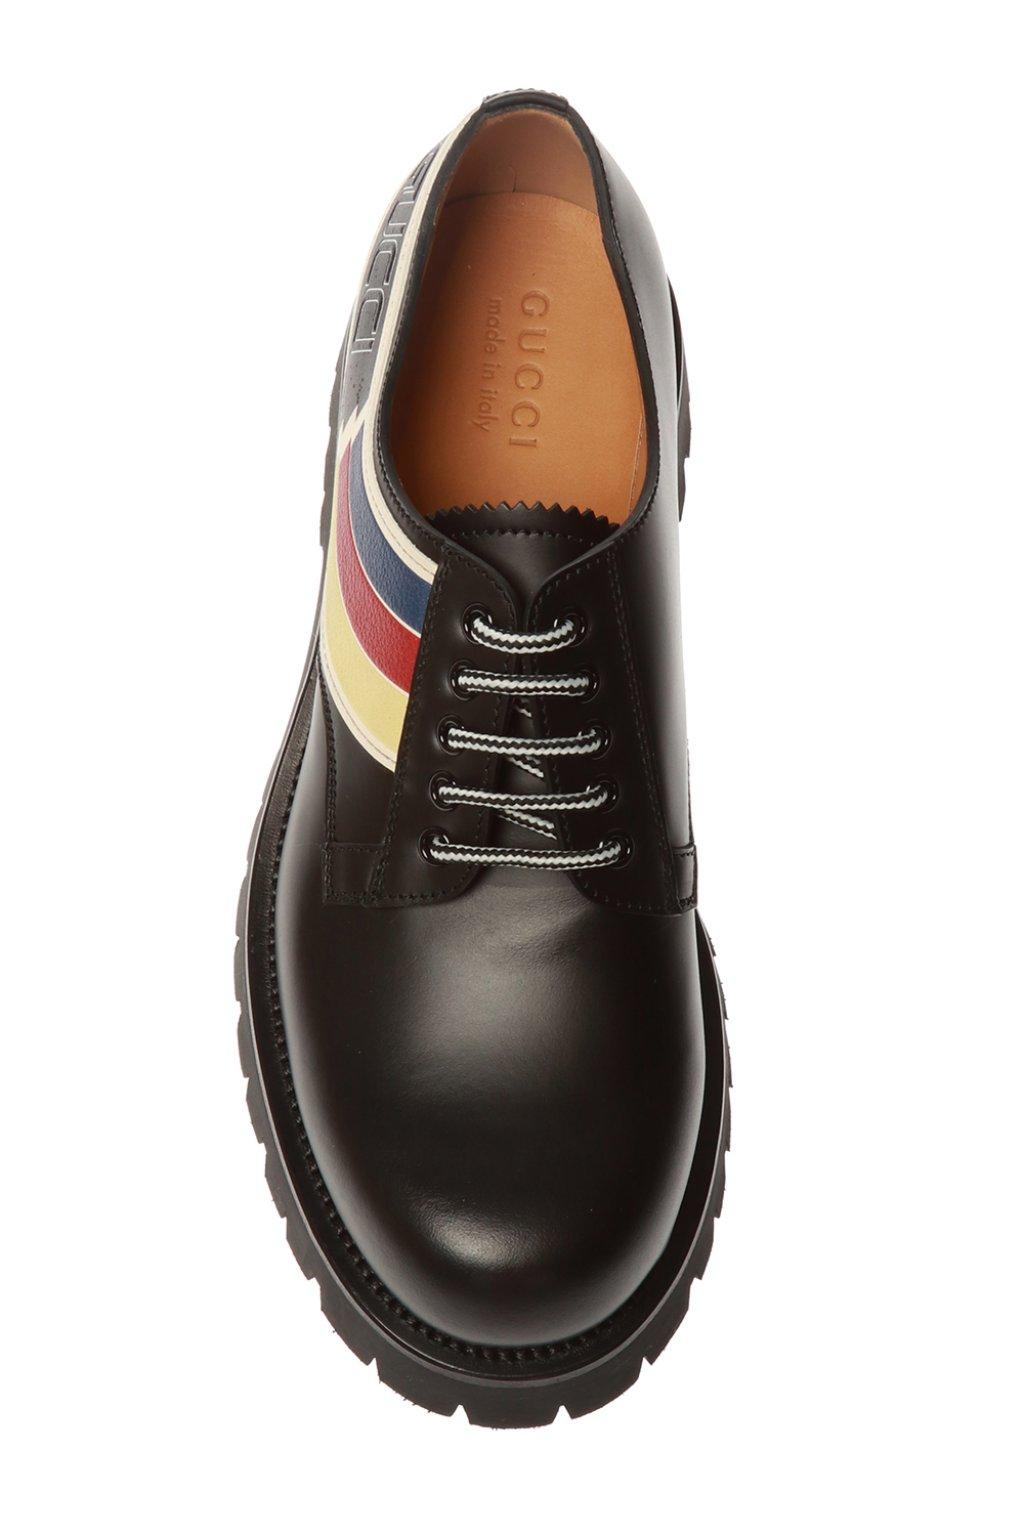 Gucci Leather Oliver Derby Shoes in Black for Men - Lyst